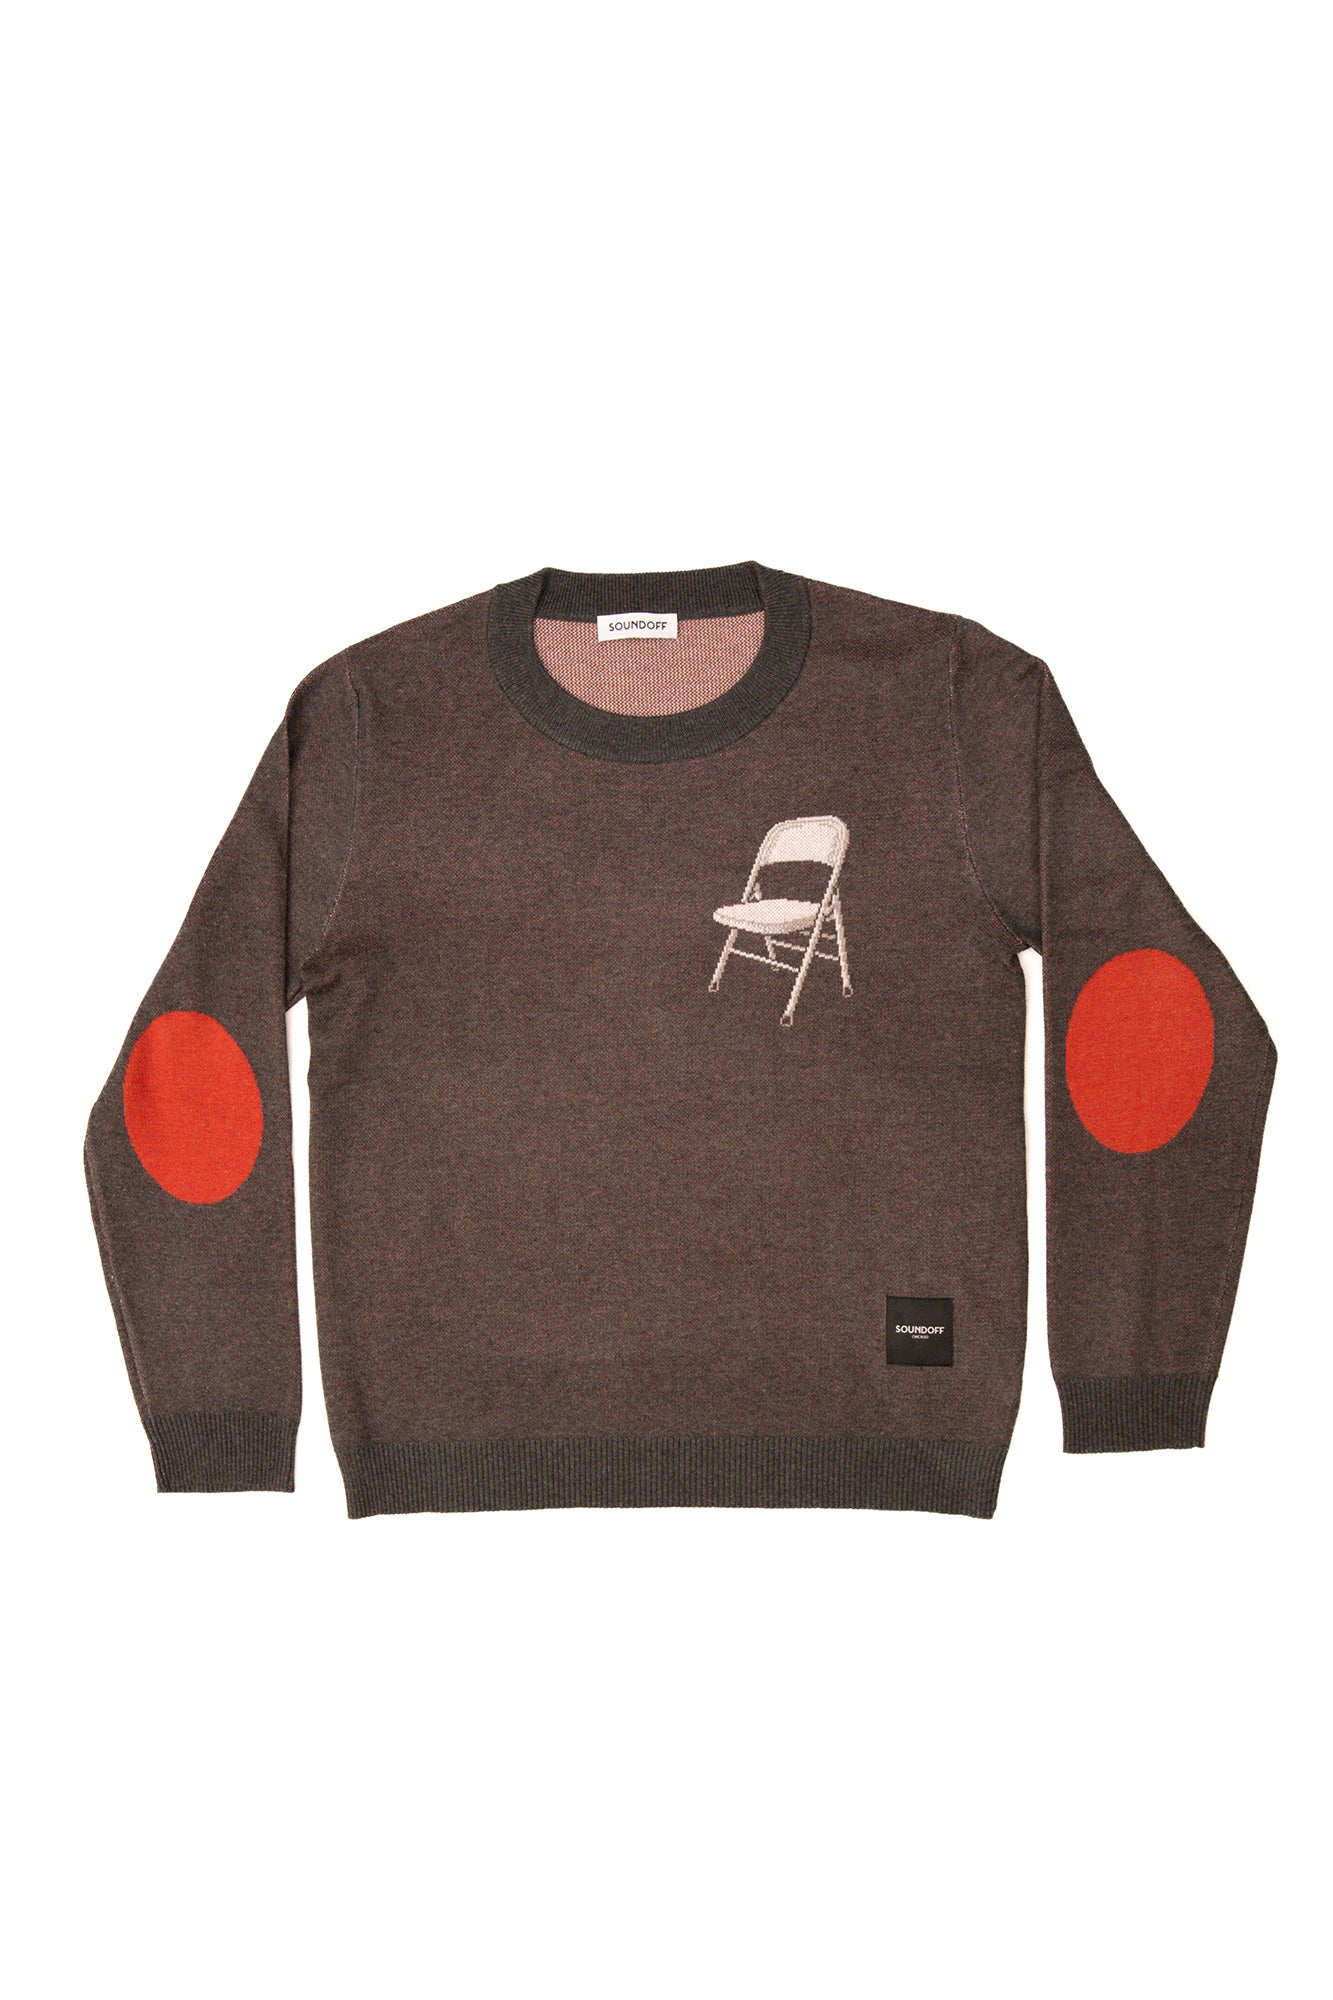 FOLDING CHAIR KNIT CREW; MADE TO ORDER